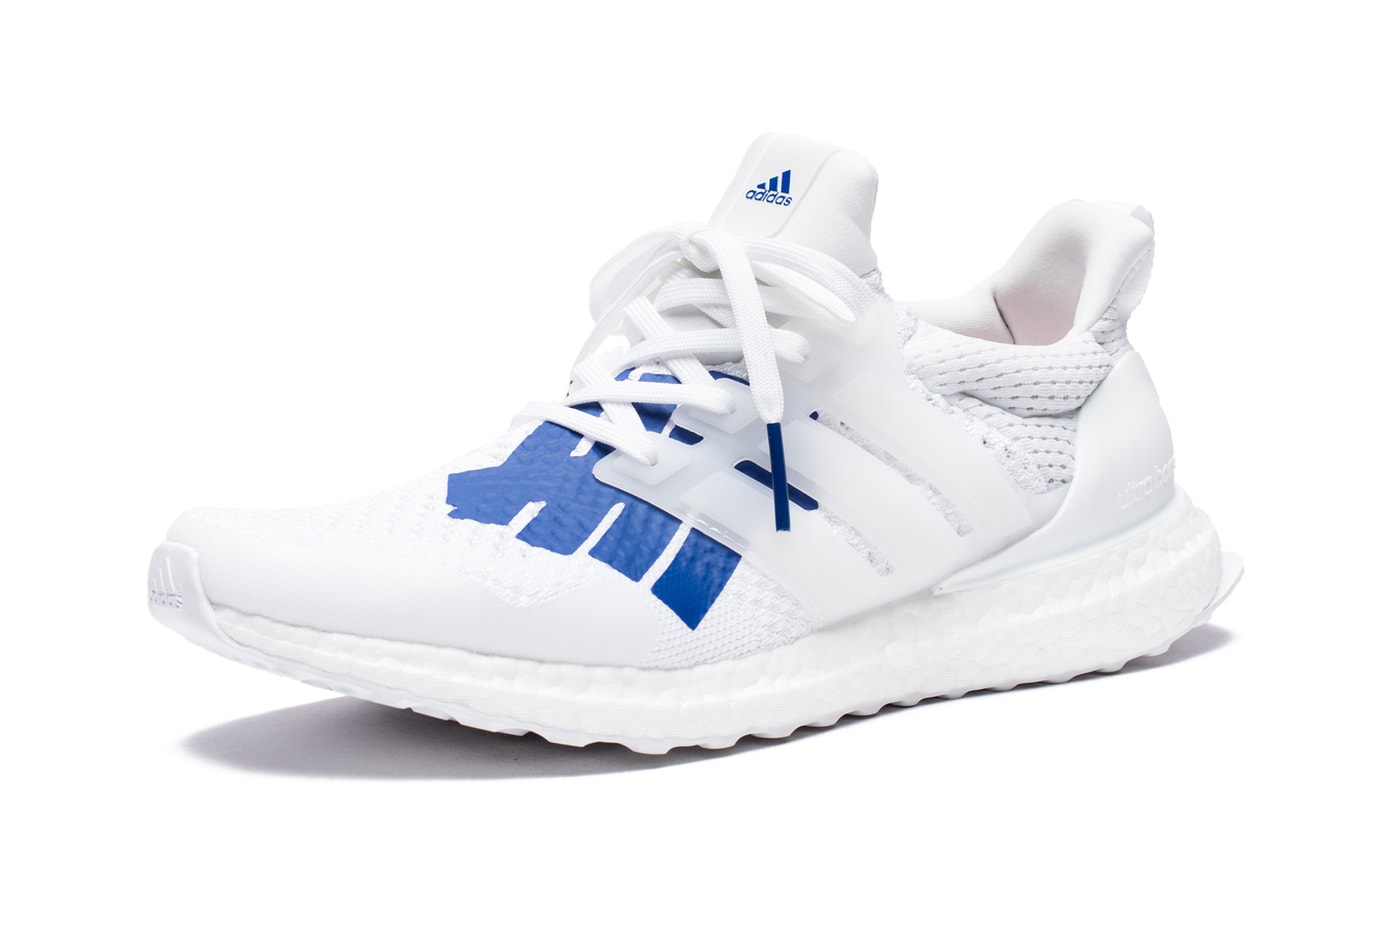 UNDEFEATED x adidas UltraBOOST 1.0 Release white red five strikes blue three strips james bond japan udftd release info america united states of america memorial day weekend